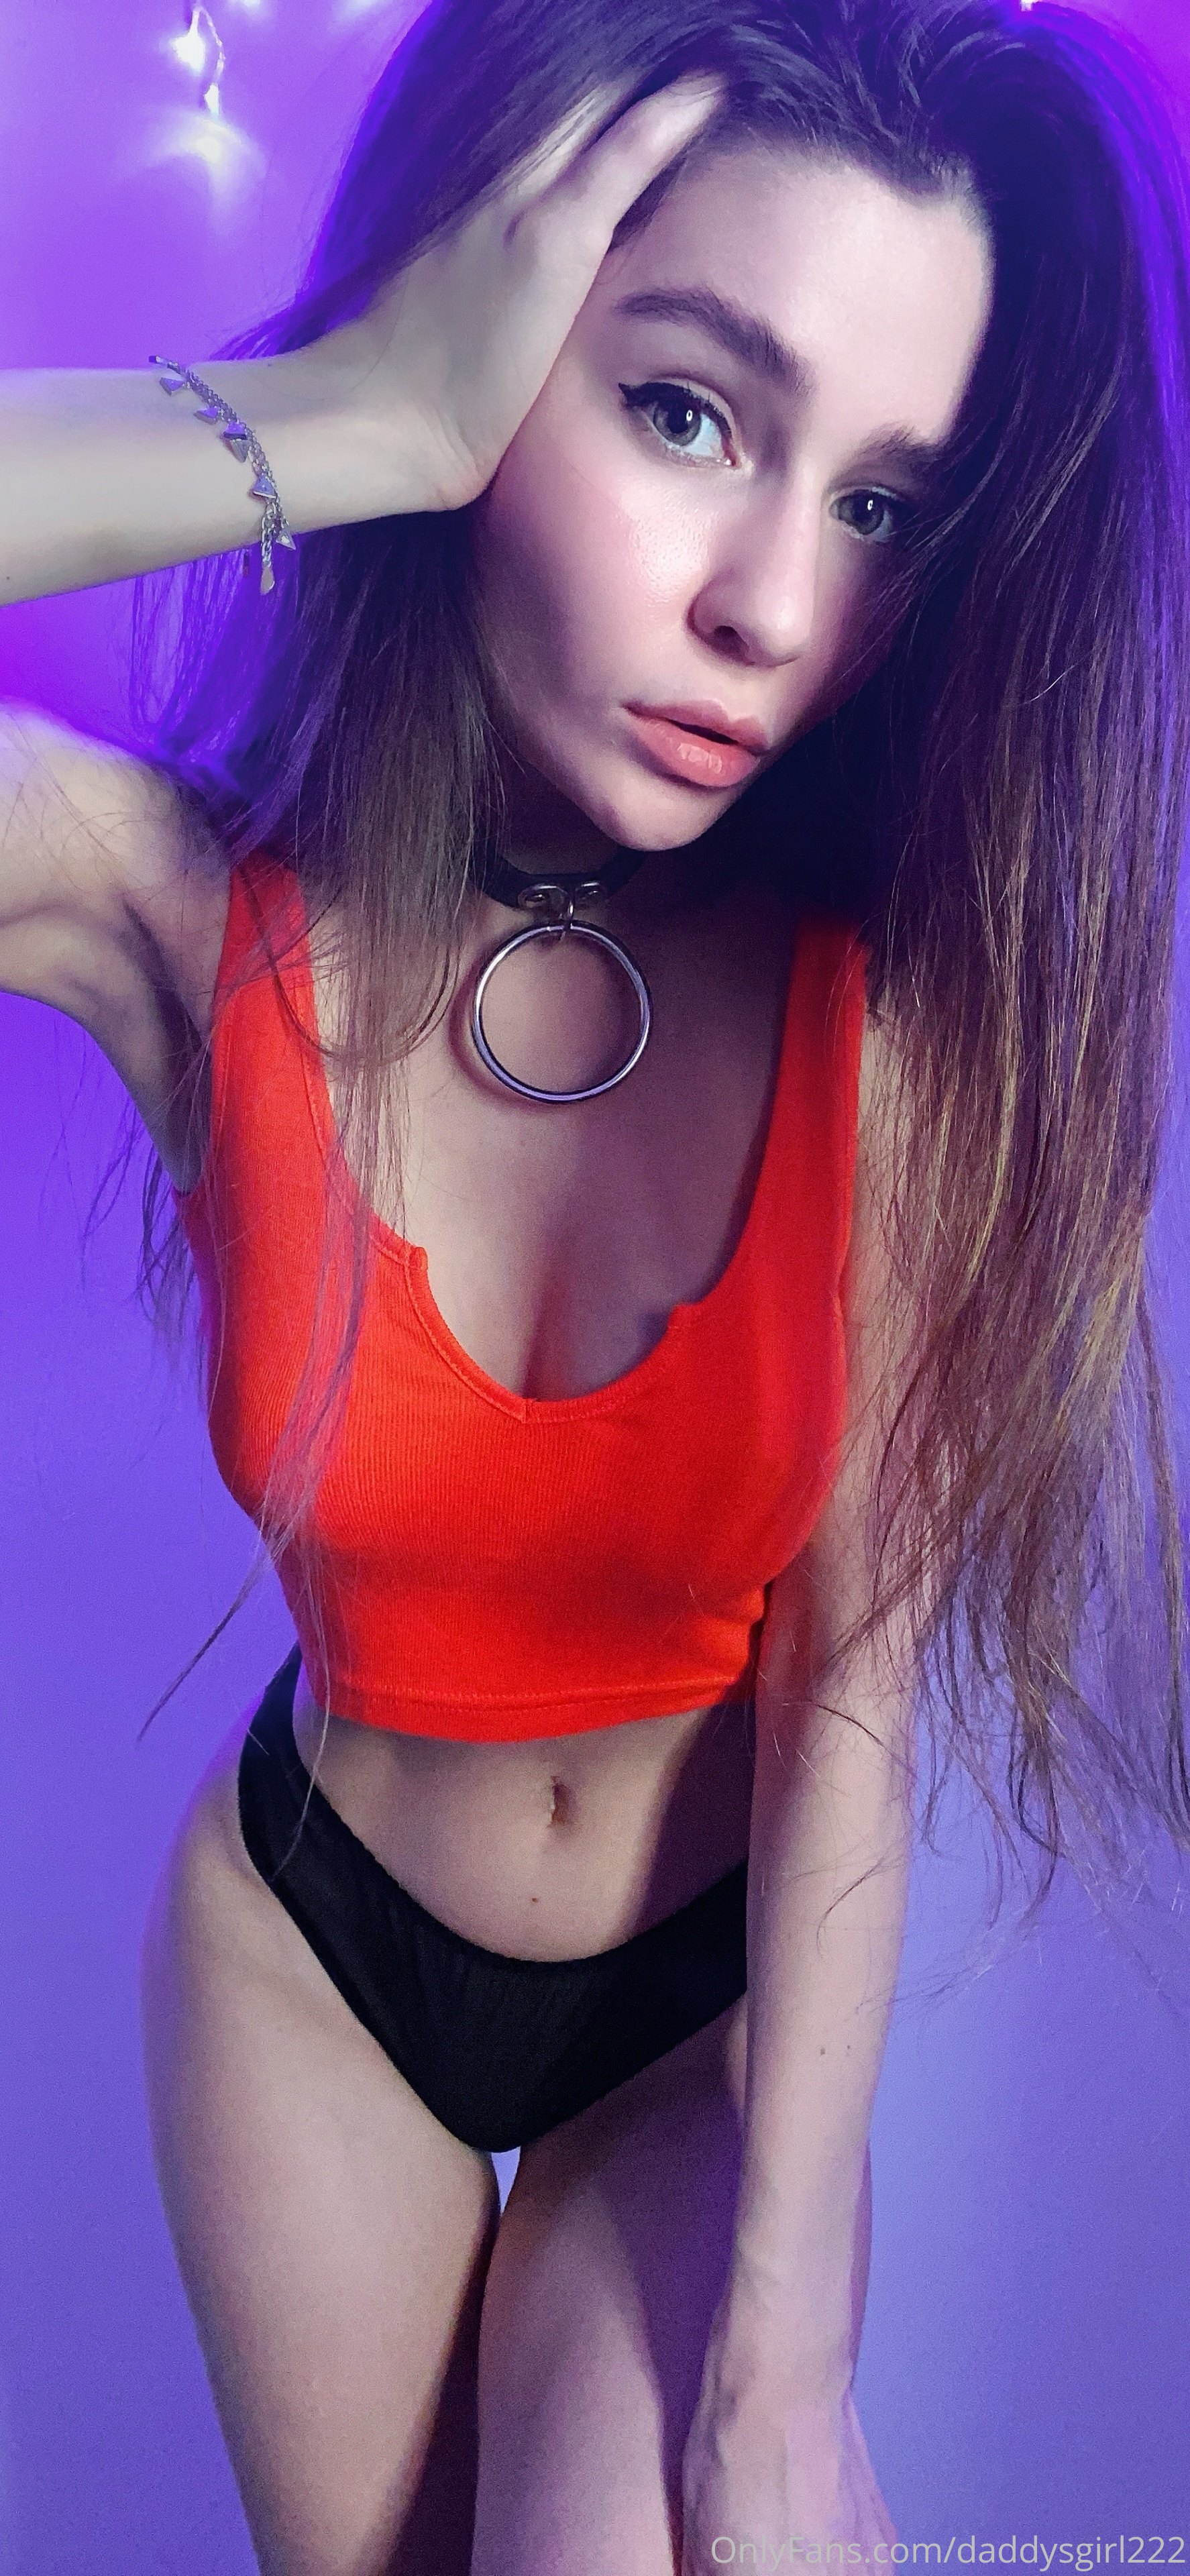 Daddysgirl222 OnlyFans daddysgirl222 22 06 2020 69691814 Remove dreads for some time What u think Soon will